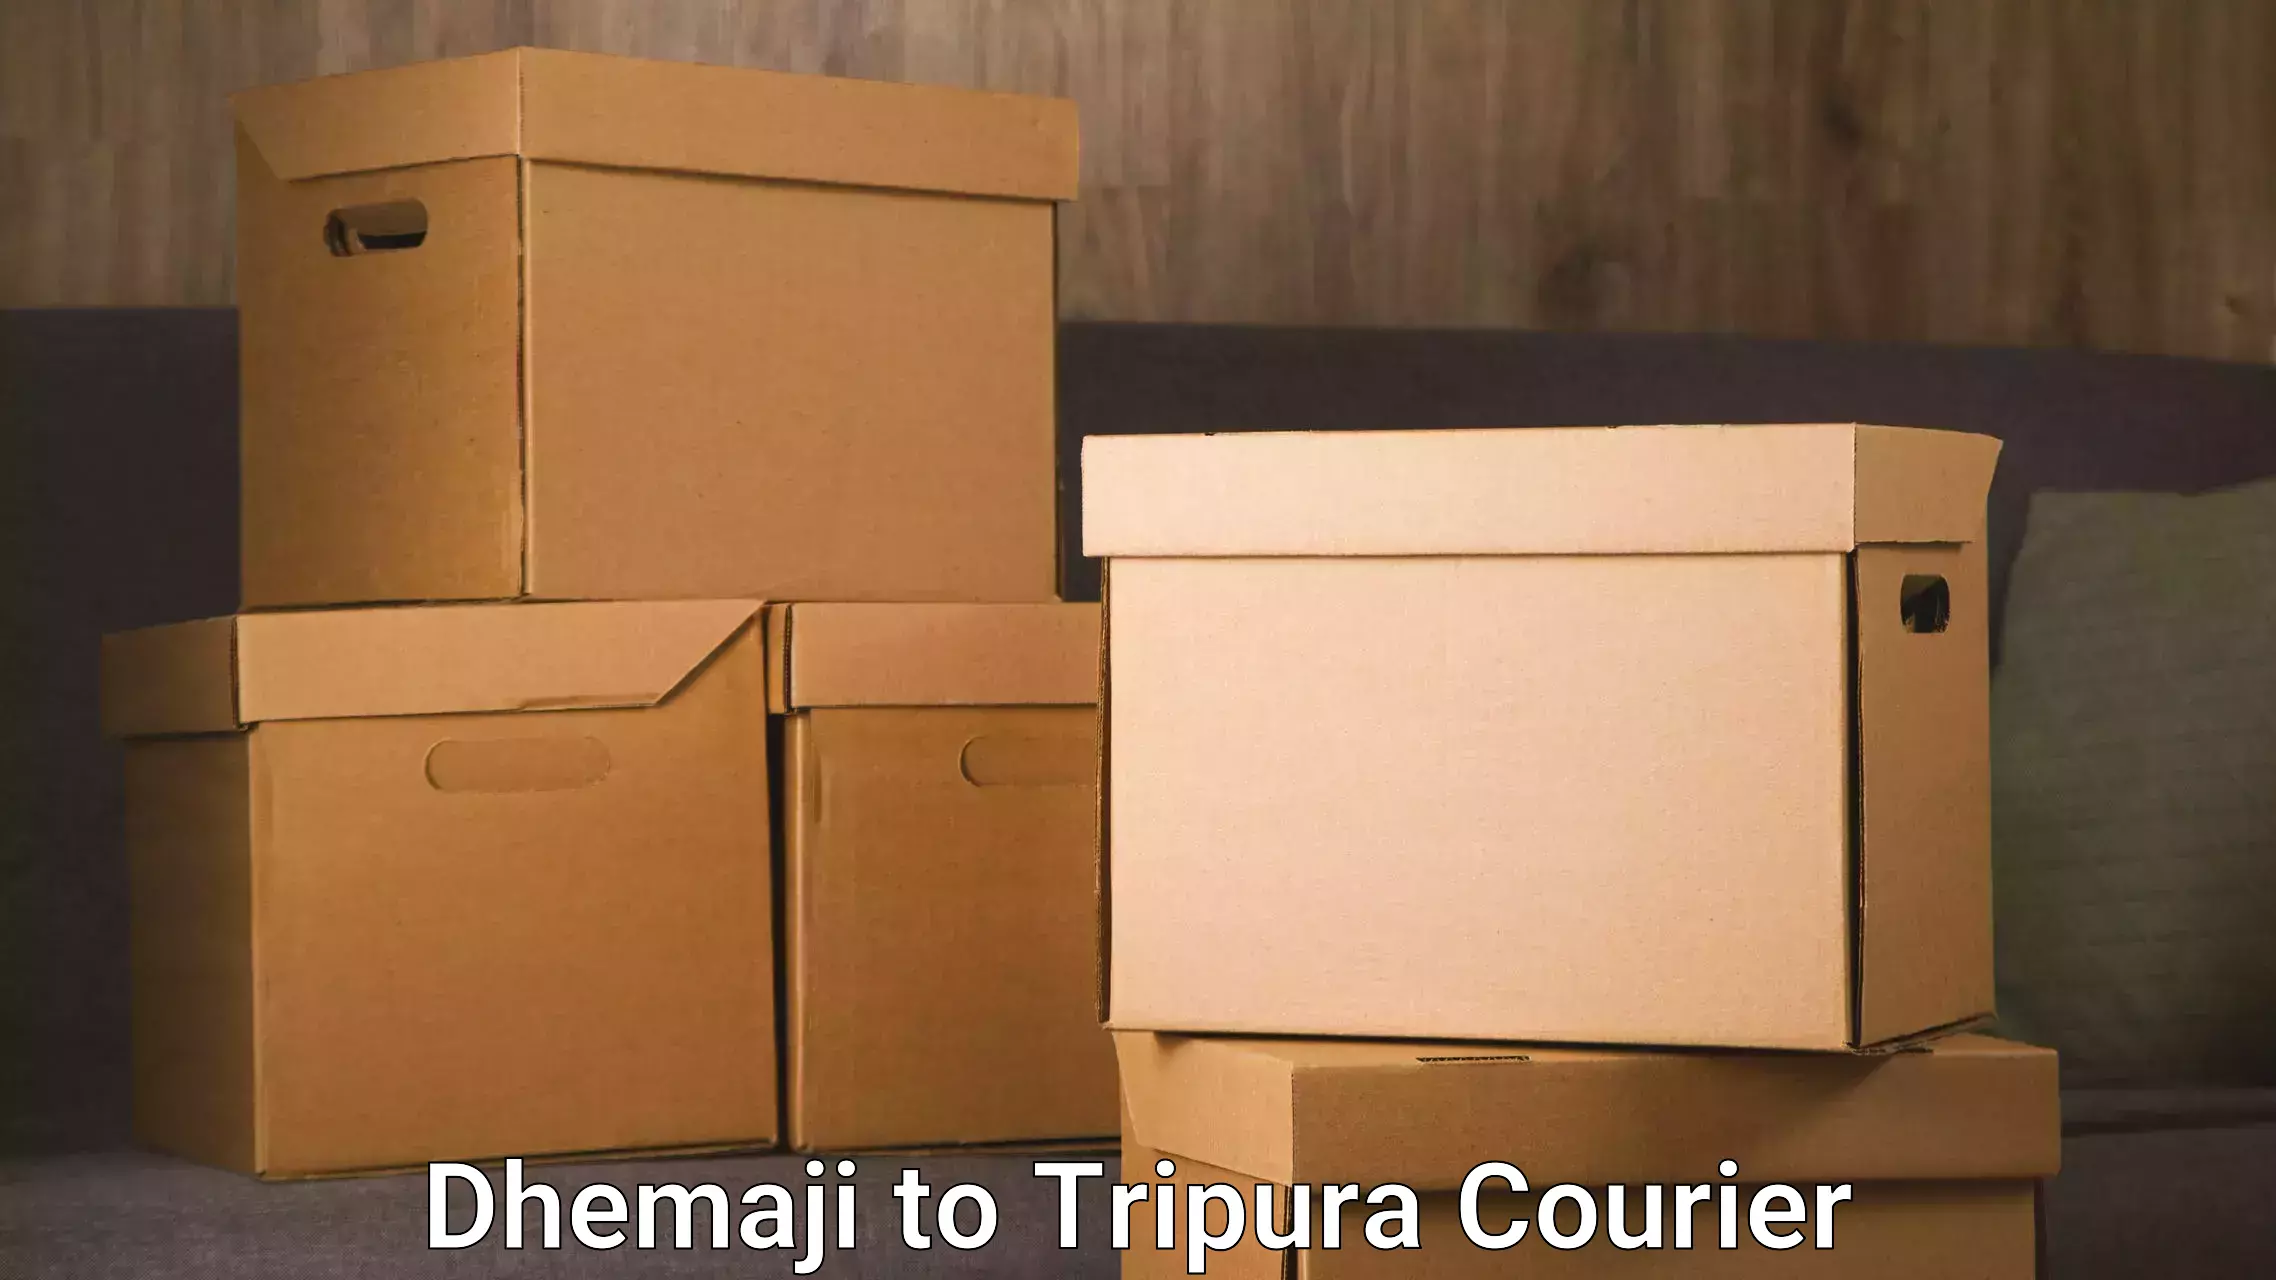 Parcel handling and care Dhemaji to Tripura